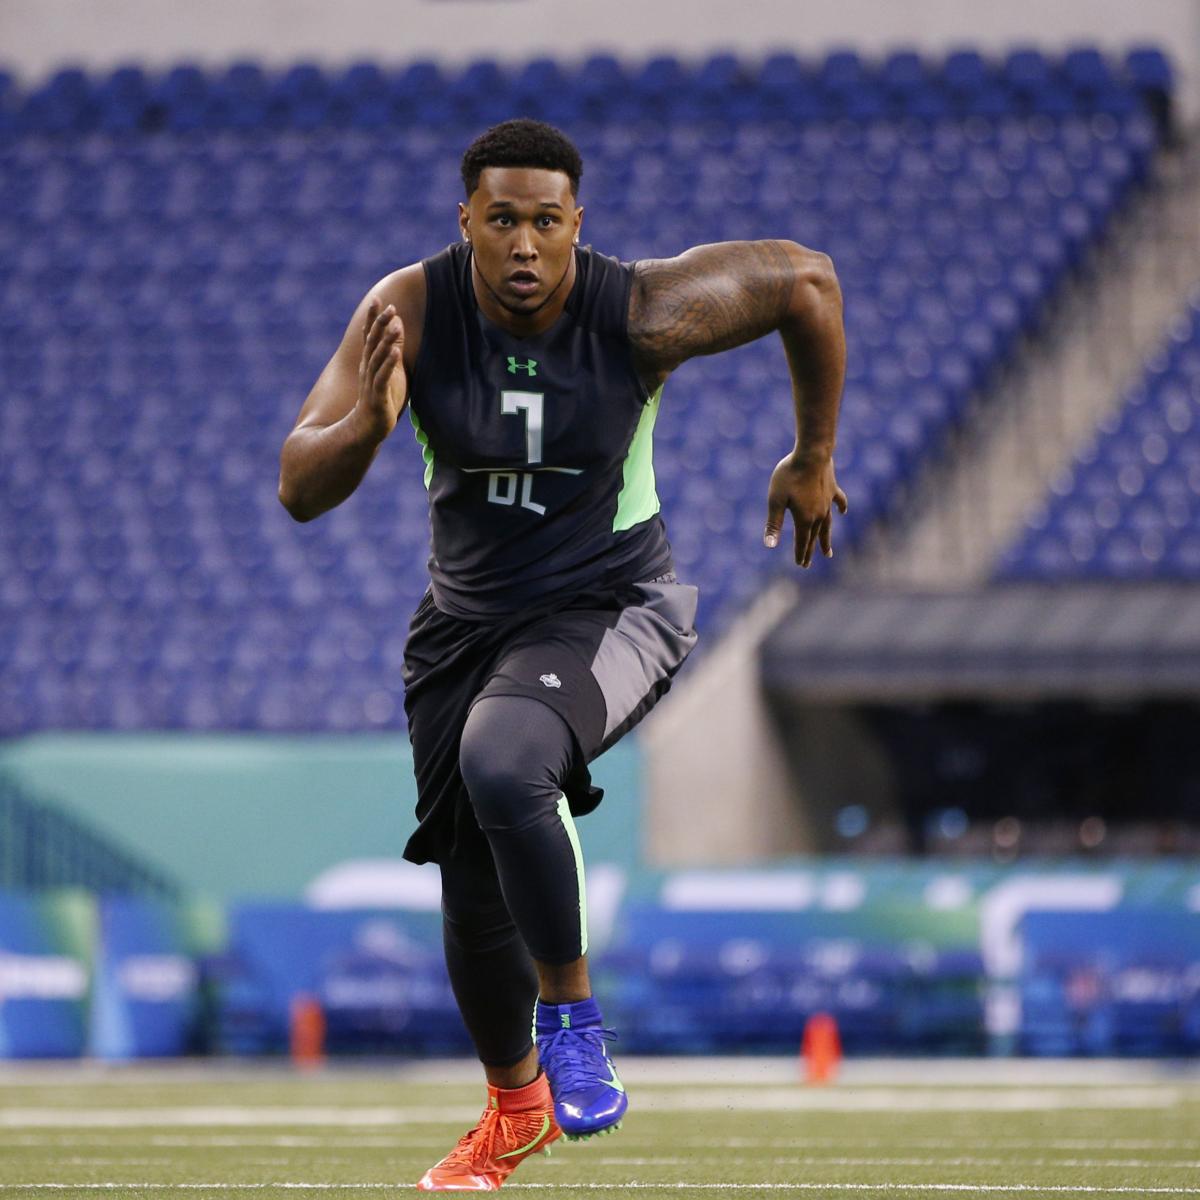 Winners and Losers from the 1st Round of the 2016 NFL Draft | News ...